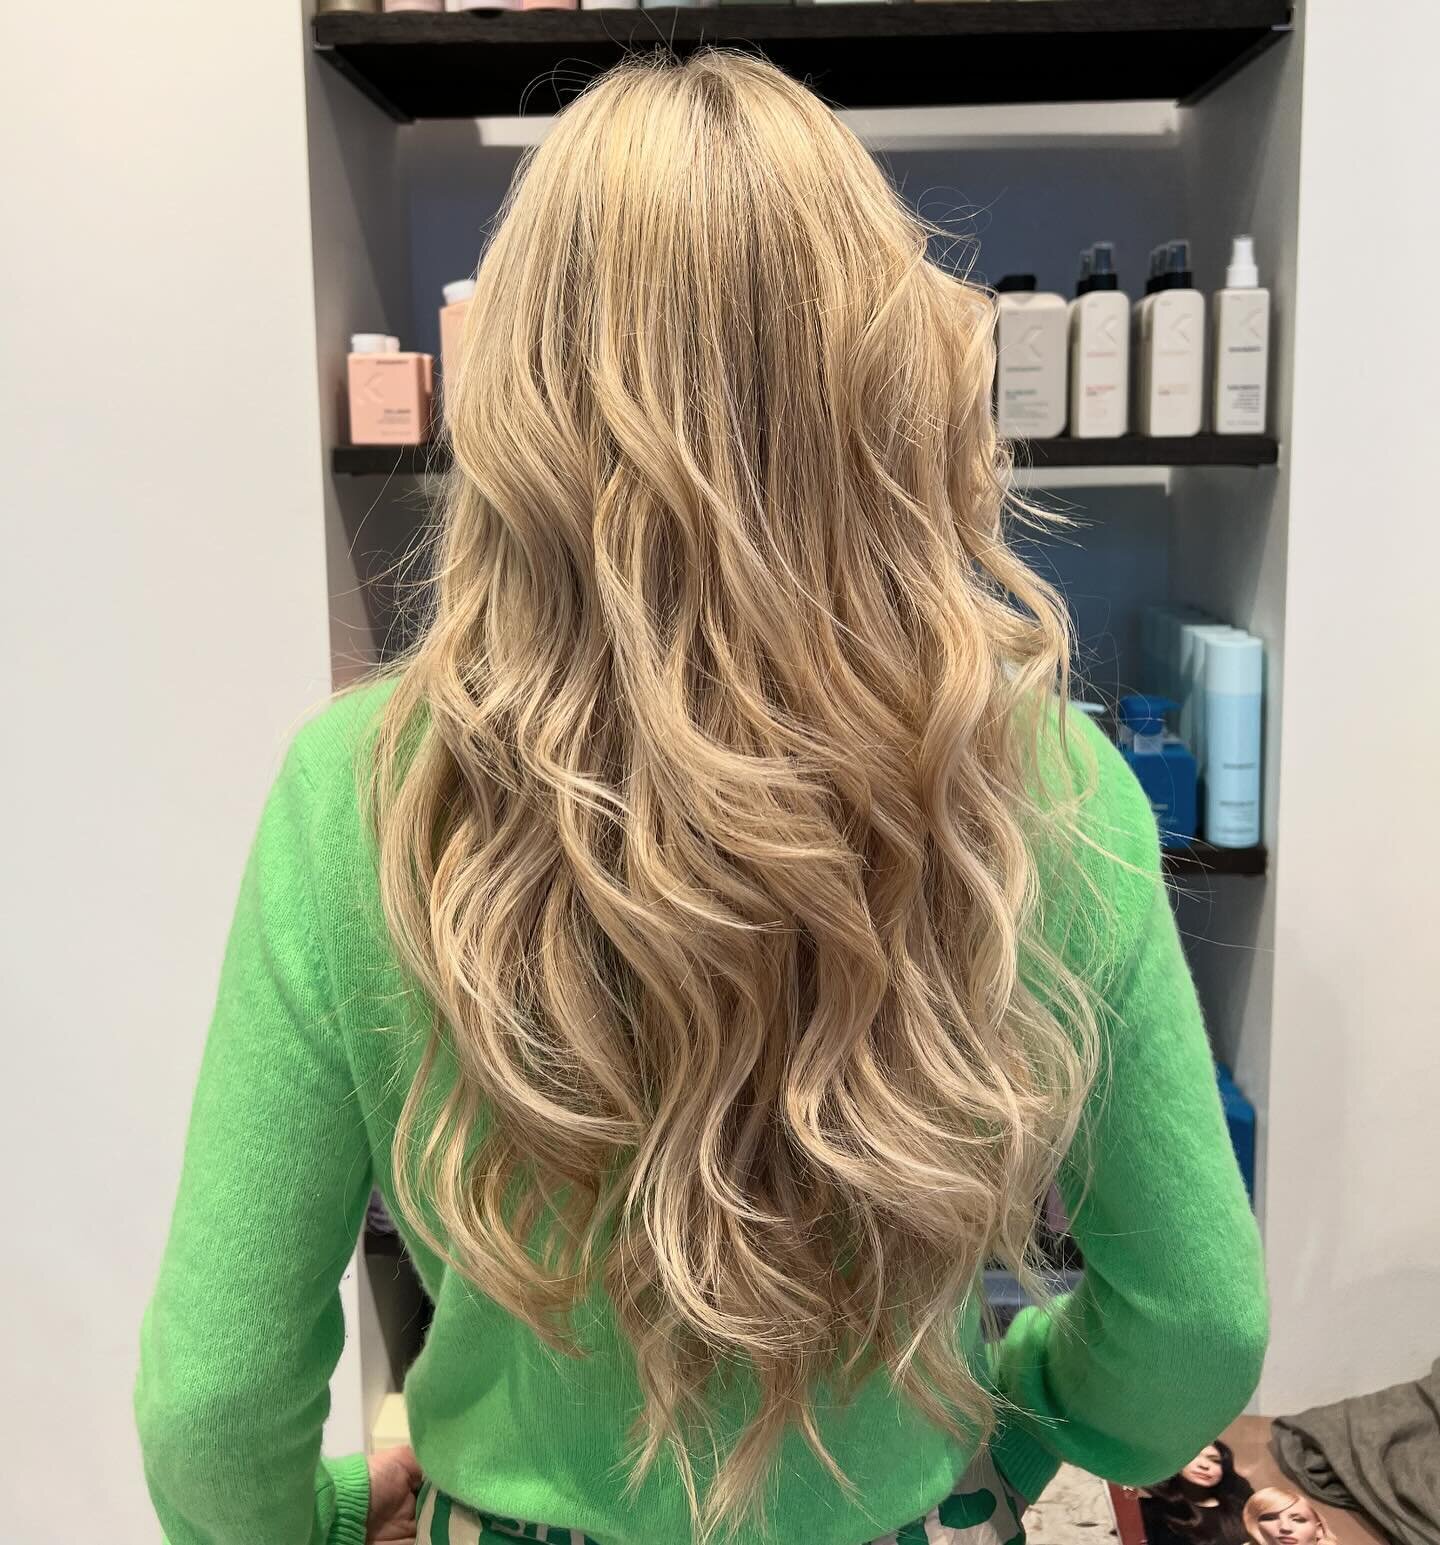 💋 Blondes Do Have More Fun They Say&hellip;. ;D 

#blondehair #onceblondealwaysblonde #blondebeauty  #hilights #freehandbalayage #balayage #glossing  #wawyhair #haircut #haircolour #longhair #hairtreatment #b3  #b3brazilianbondbuilder #redkenshadese